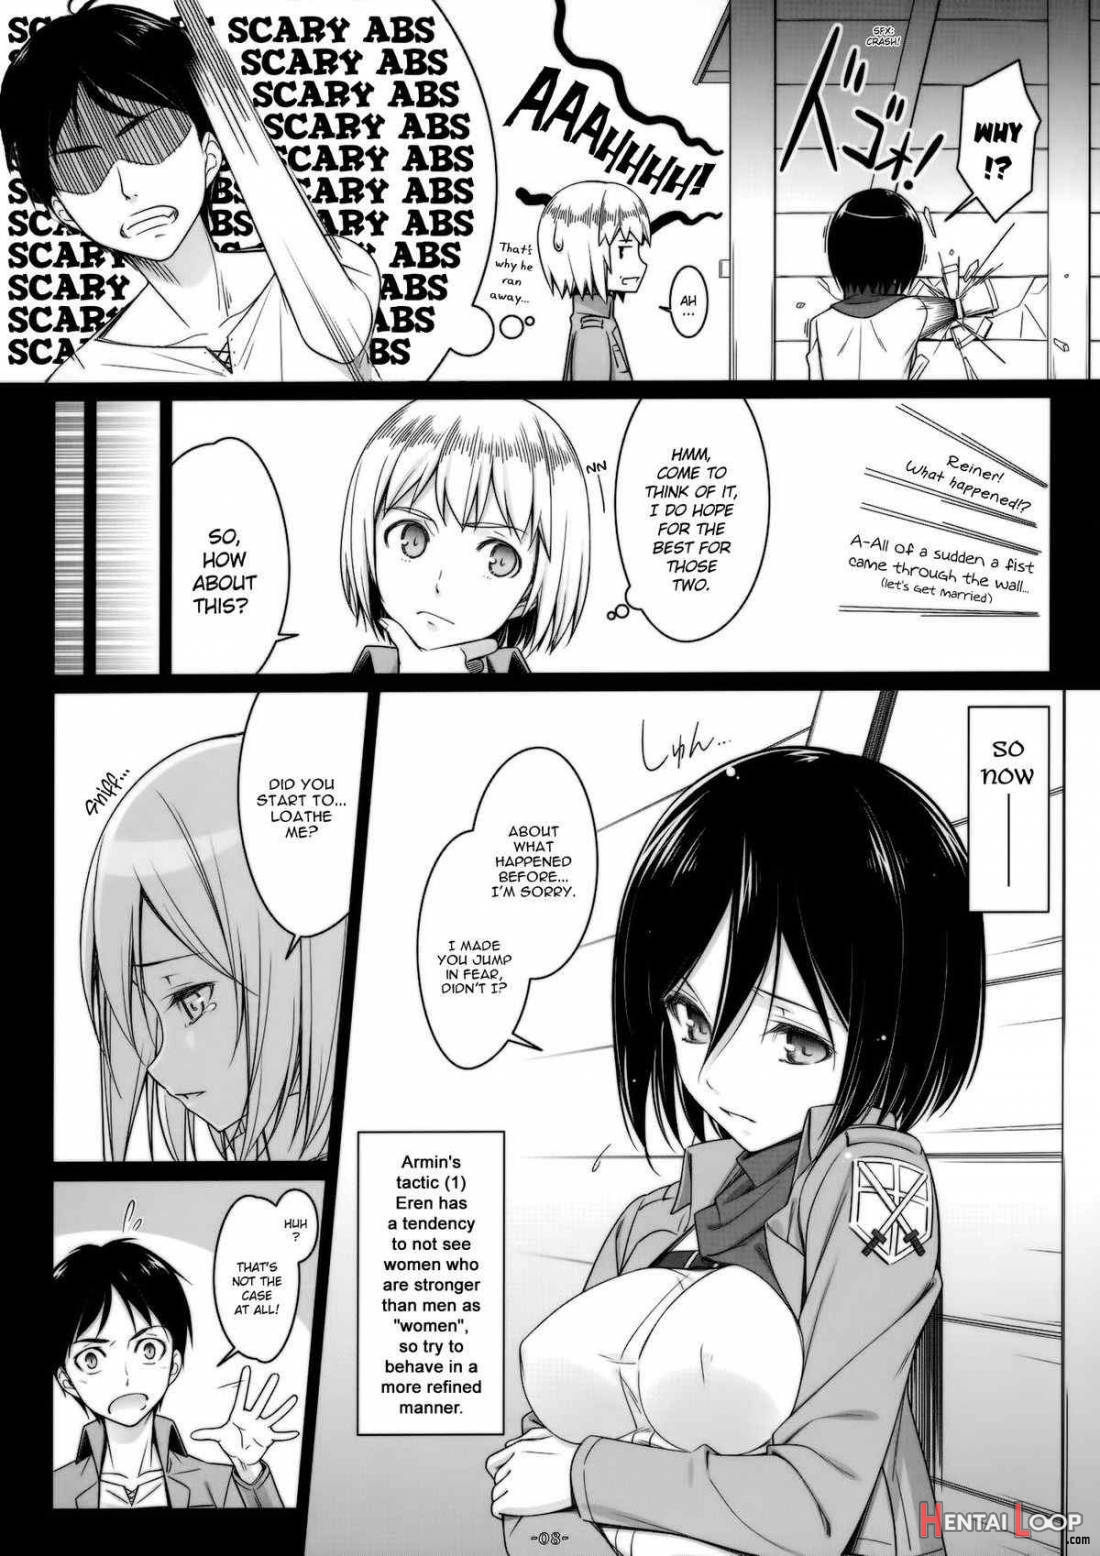 ATTACK ON MIKASA page 5